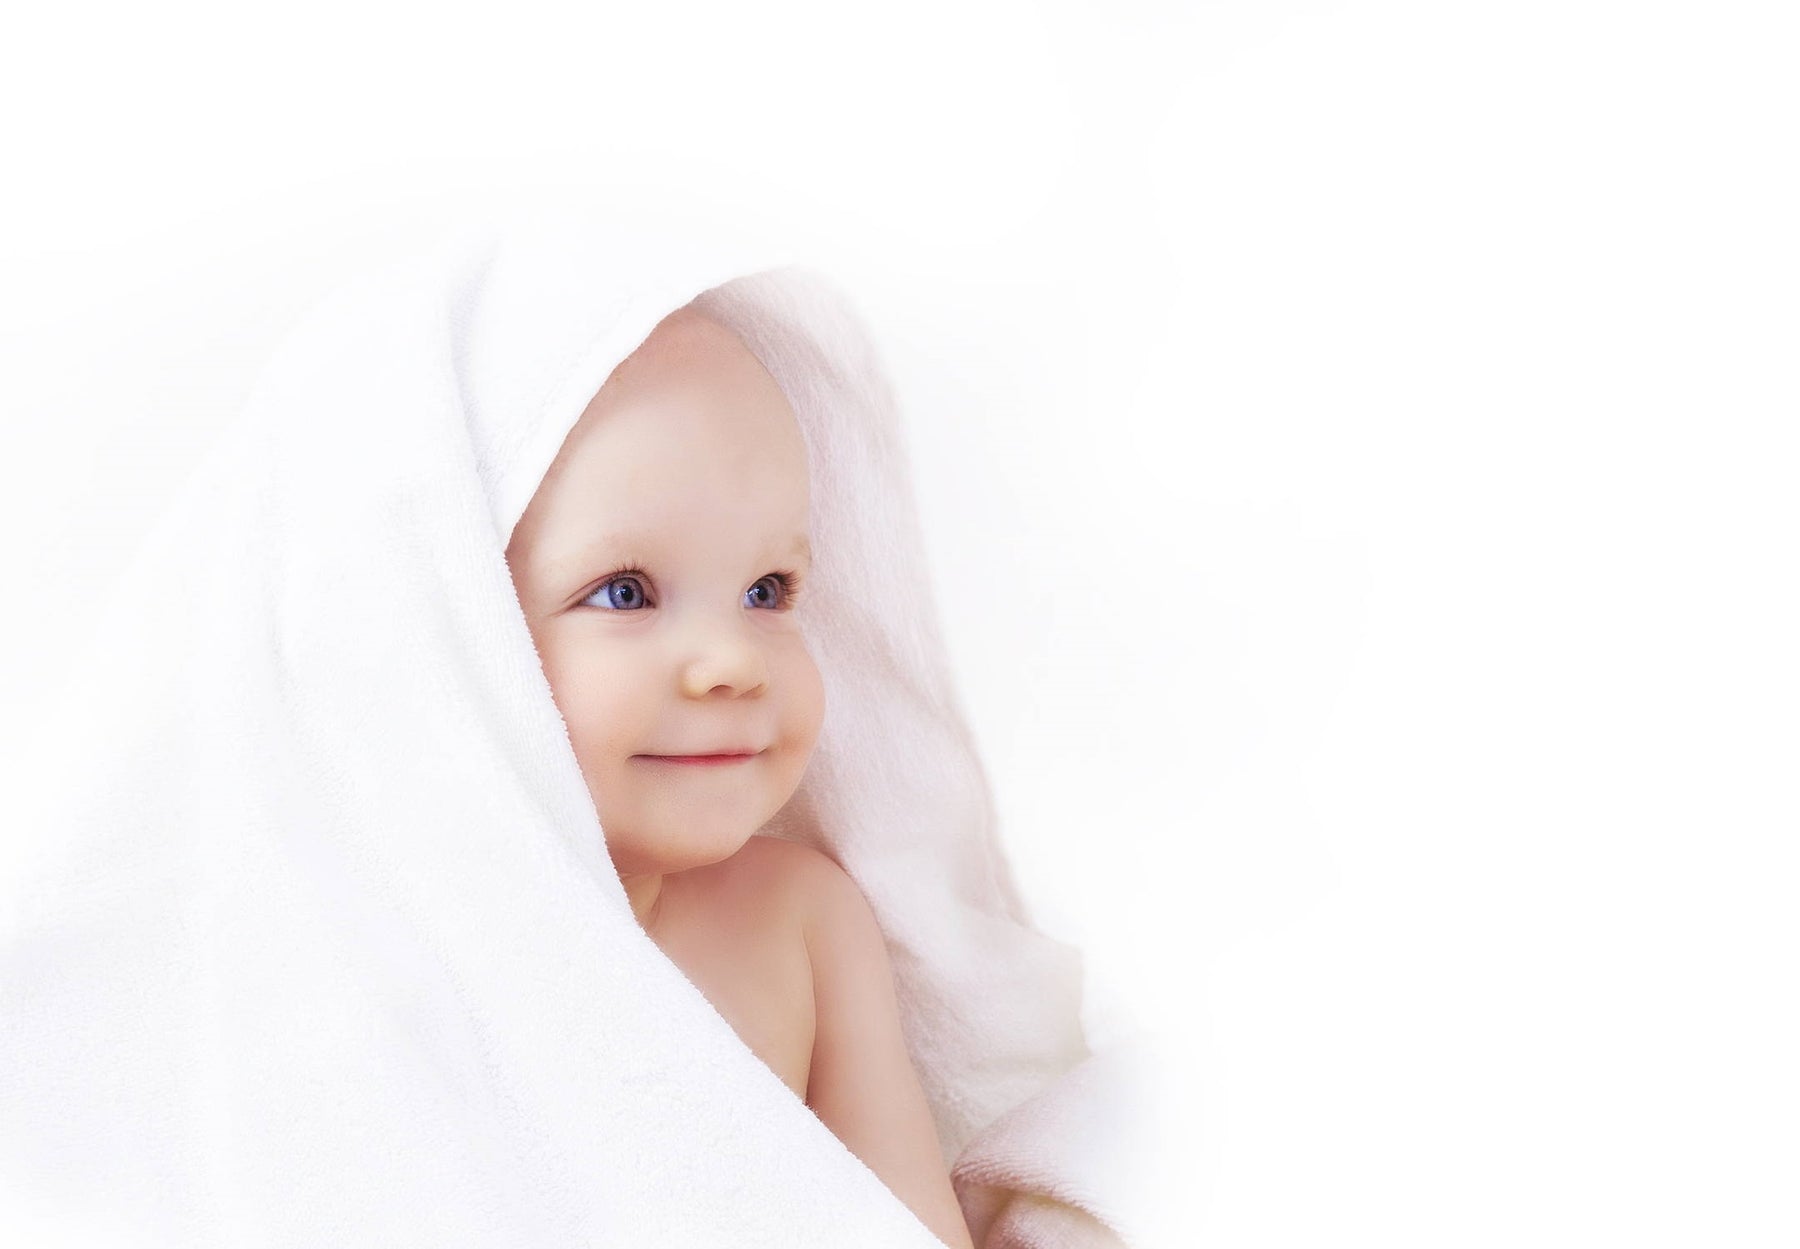 A smiling baby with a white towel on their head